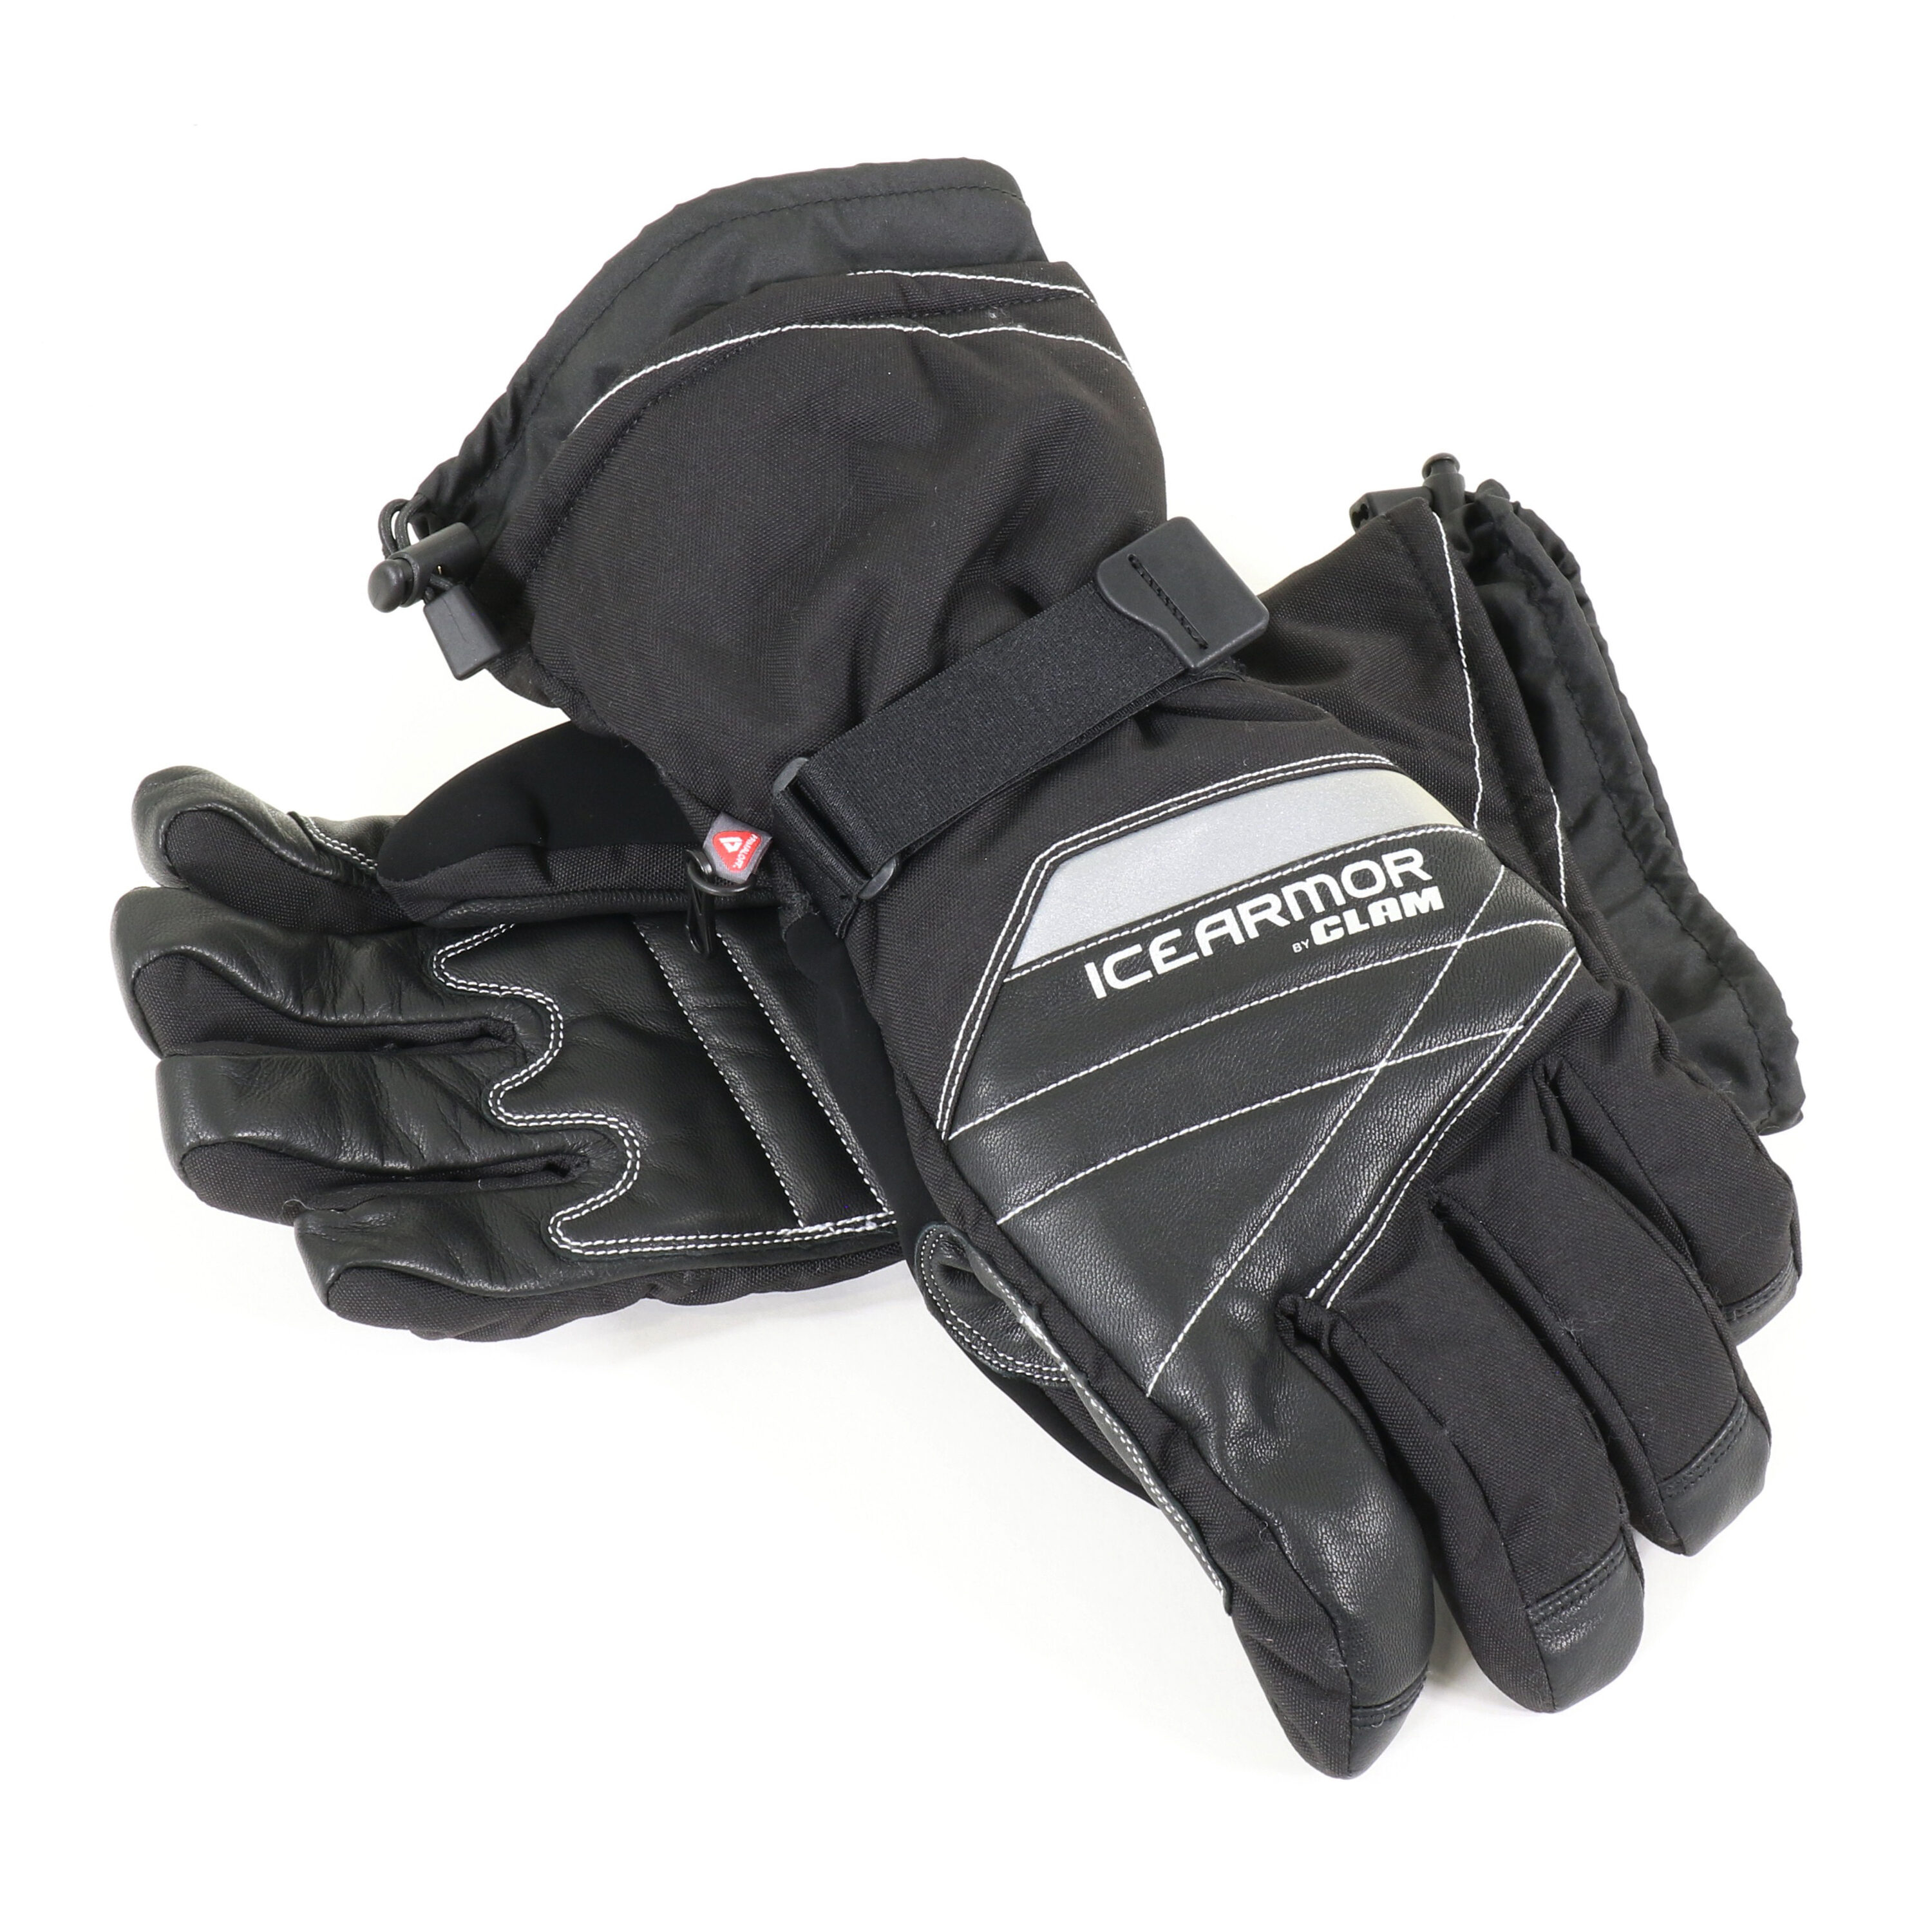 Clam Outdoors Renegade Ice Fishing Glove X Large Black in the